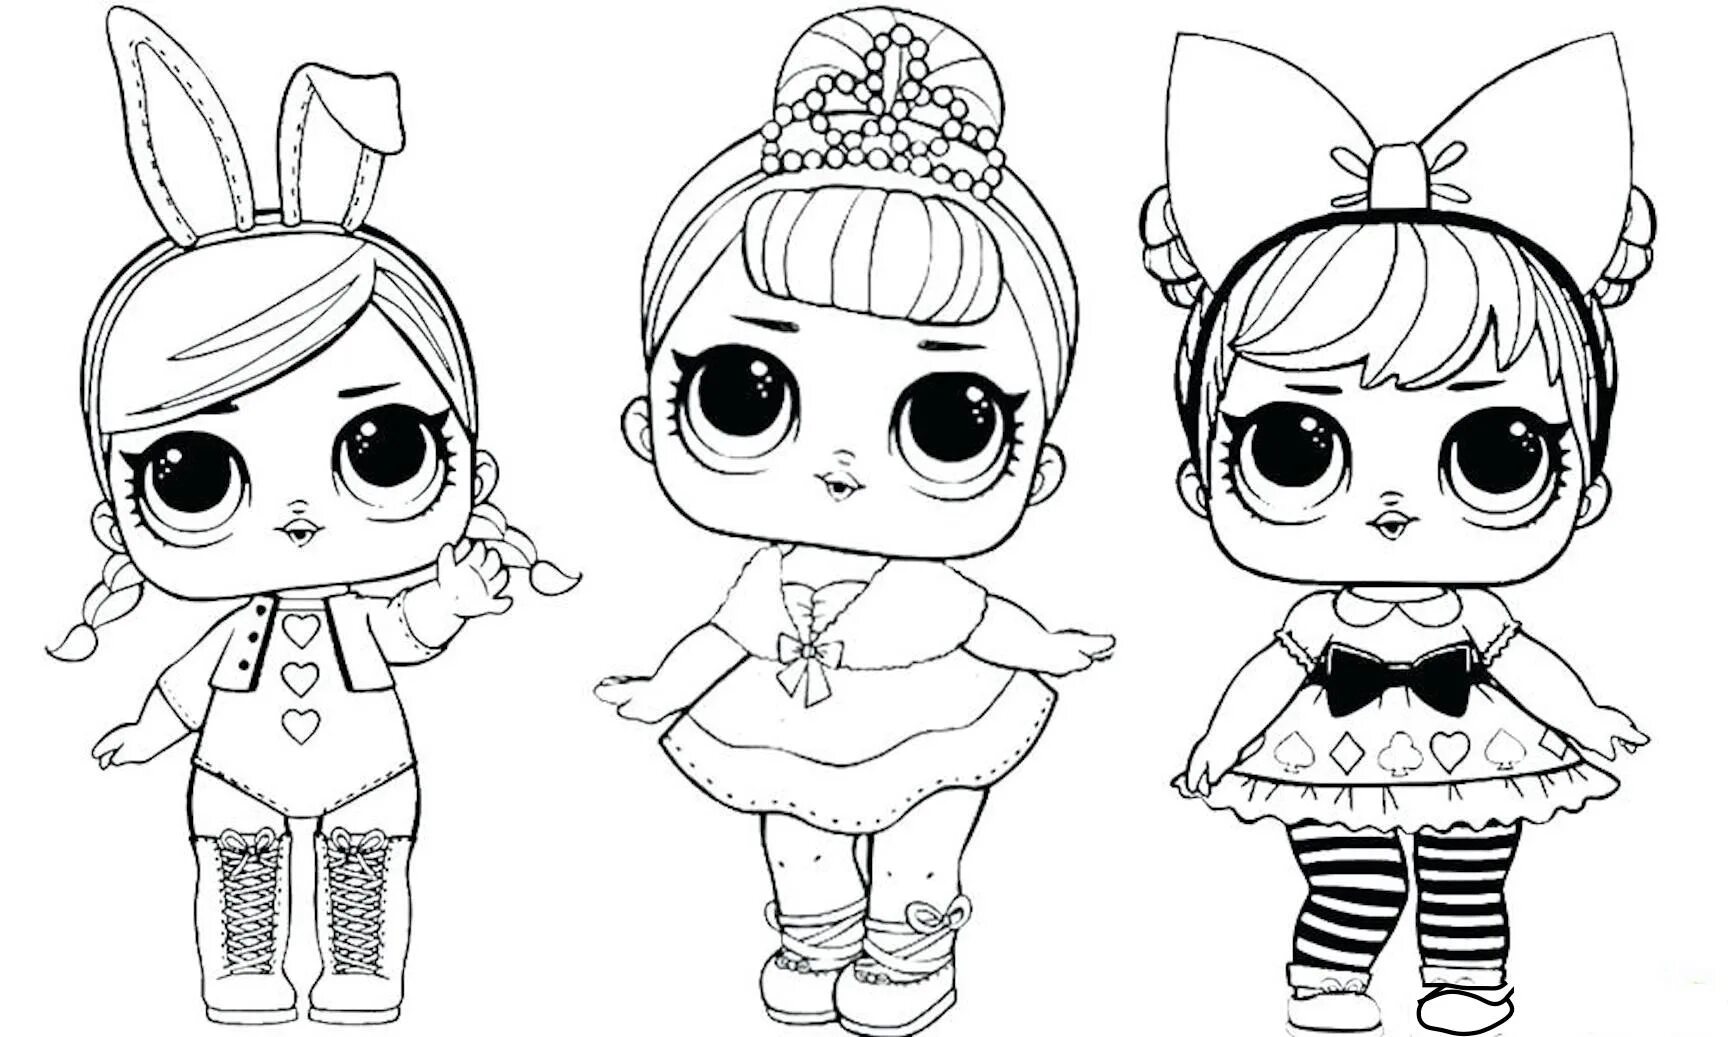 Coloring book for girls doll lol #13